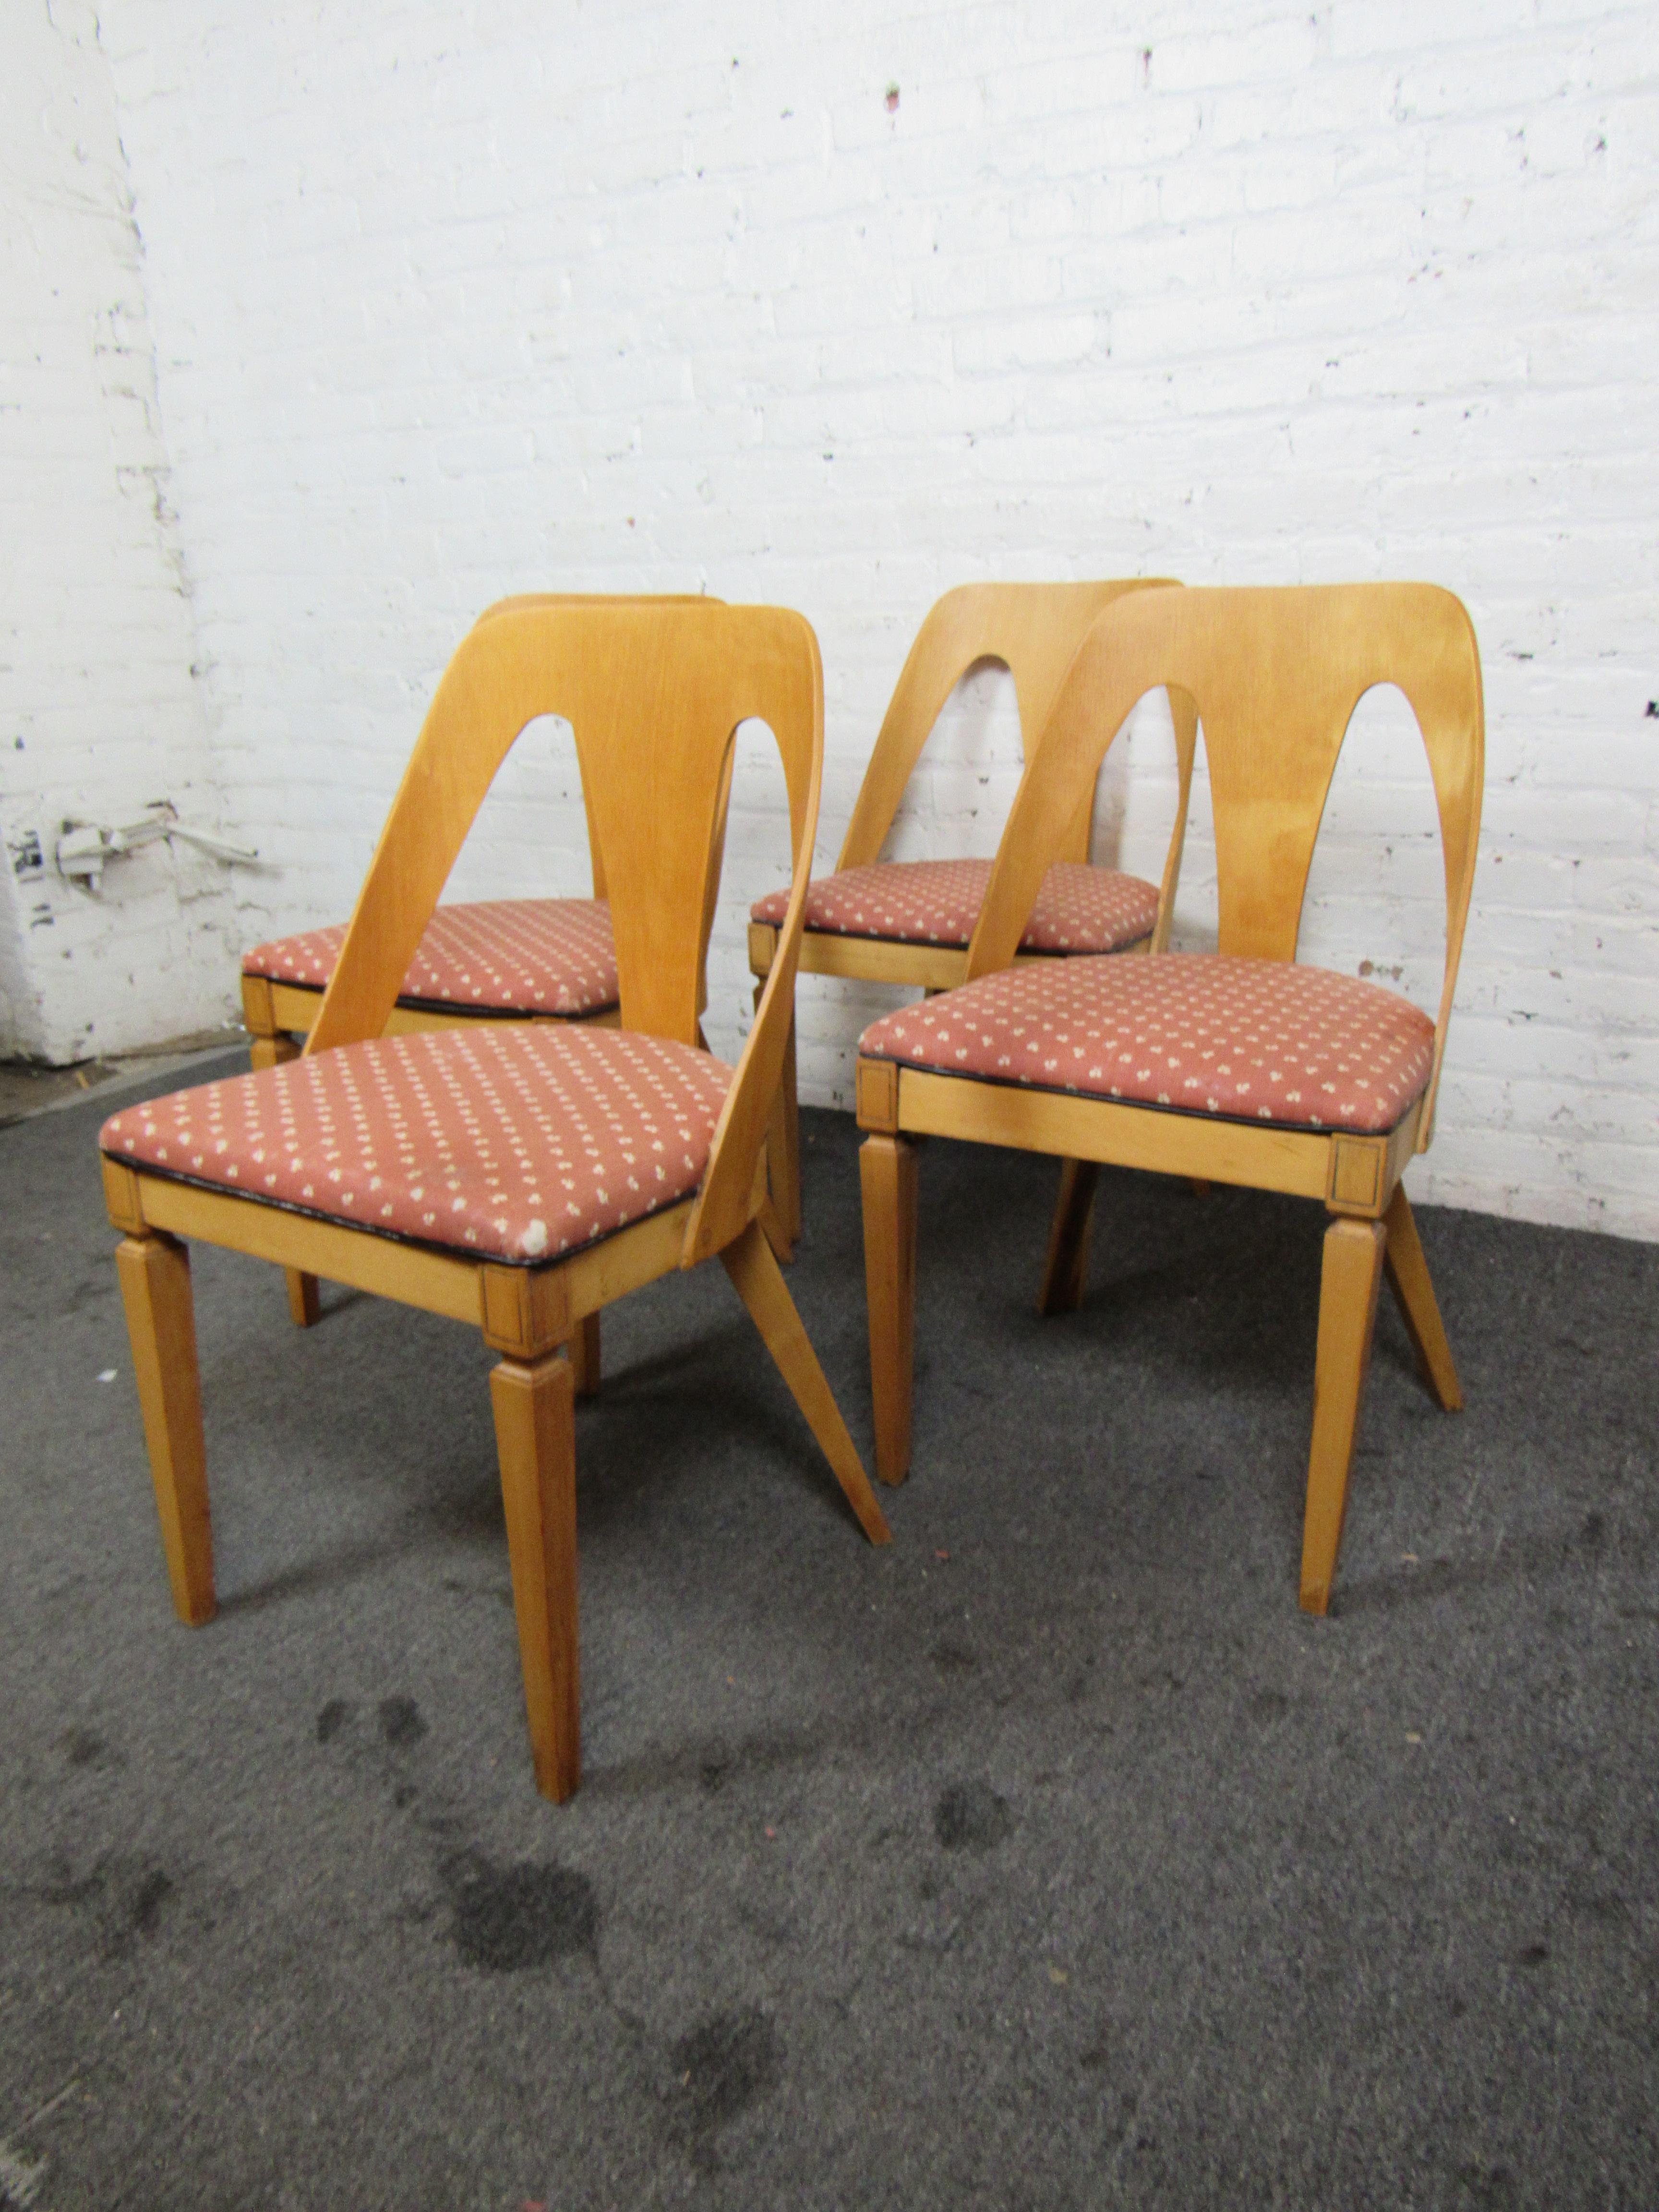 This set of four vintage dining chairs pair a light wood grain with warm red upholstery on cushioned seats. A minimal Mid-Century design for the chair's backs make this set a beautiful way to add timeless style to a dining room. 

Please confirm